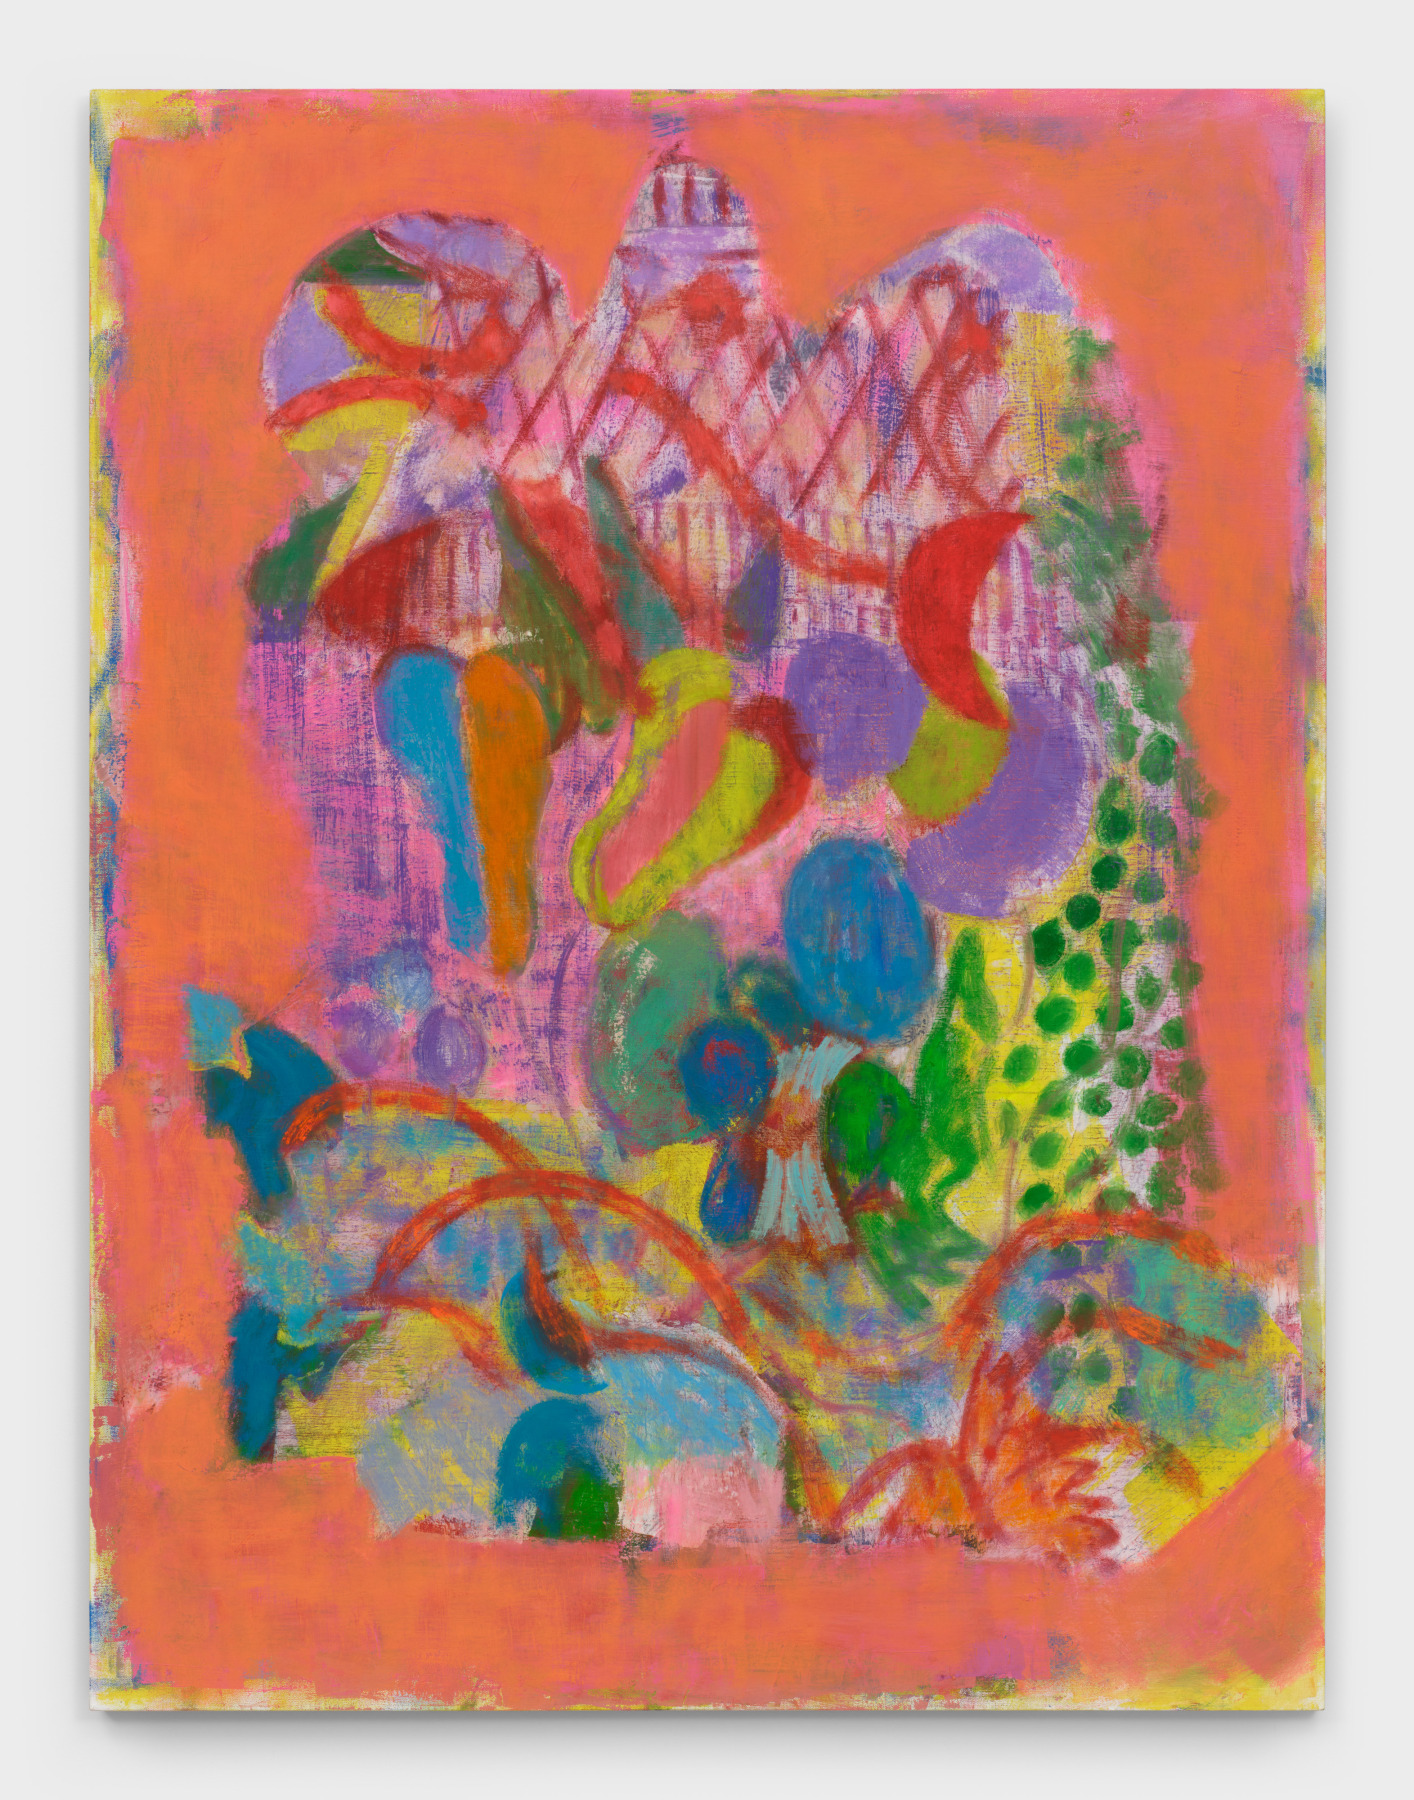 A painting by Michael Berryhill titled "Kareem," which shows colorful, abstract fruit-like shapes against a burnt orange background